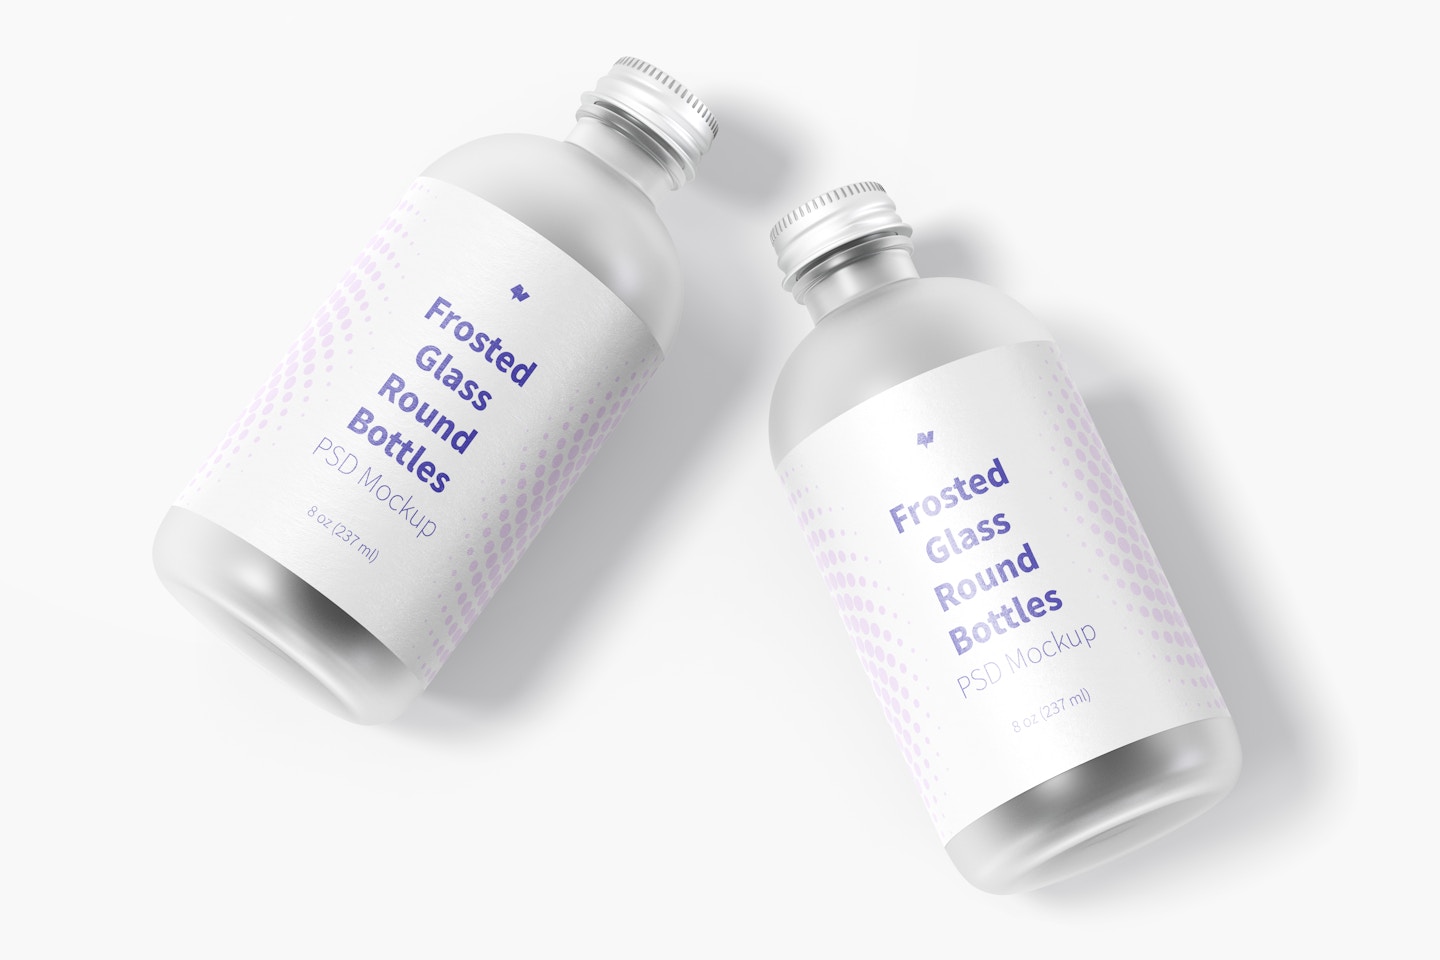 8 oz Frosted Glass Round Bottles Mockup, Top View